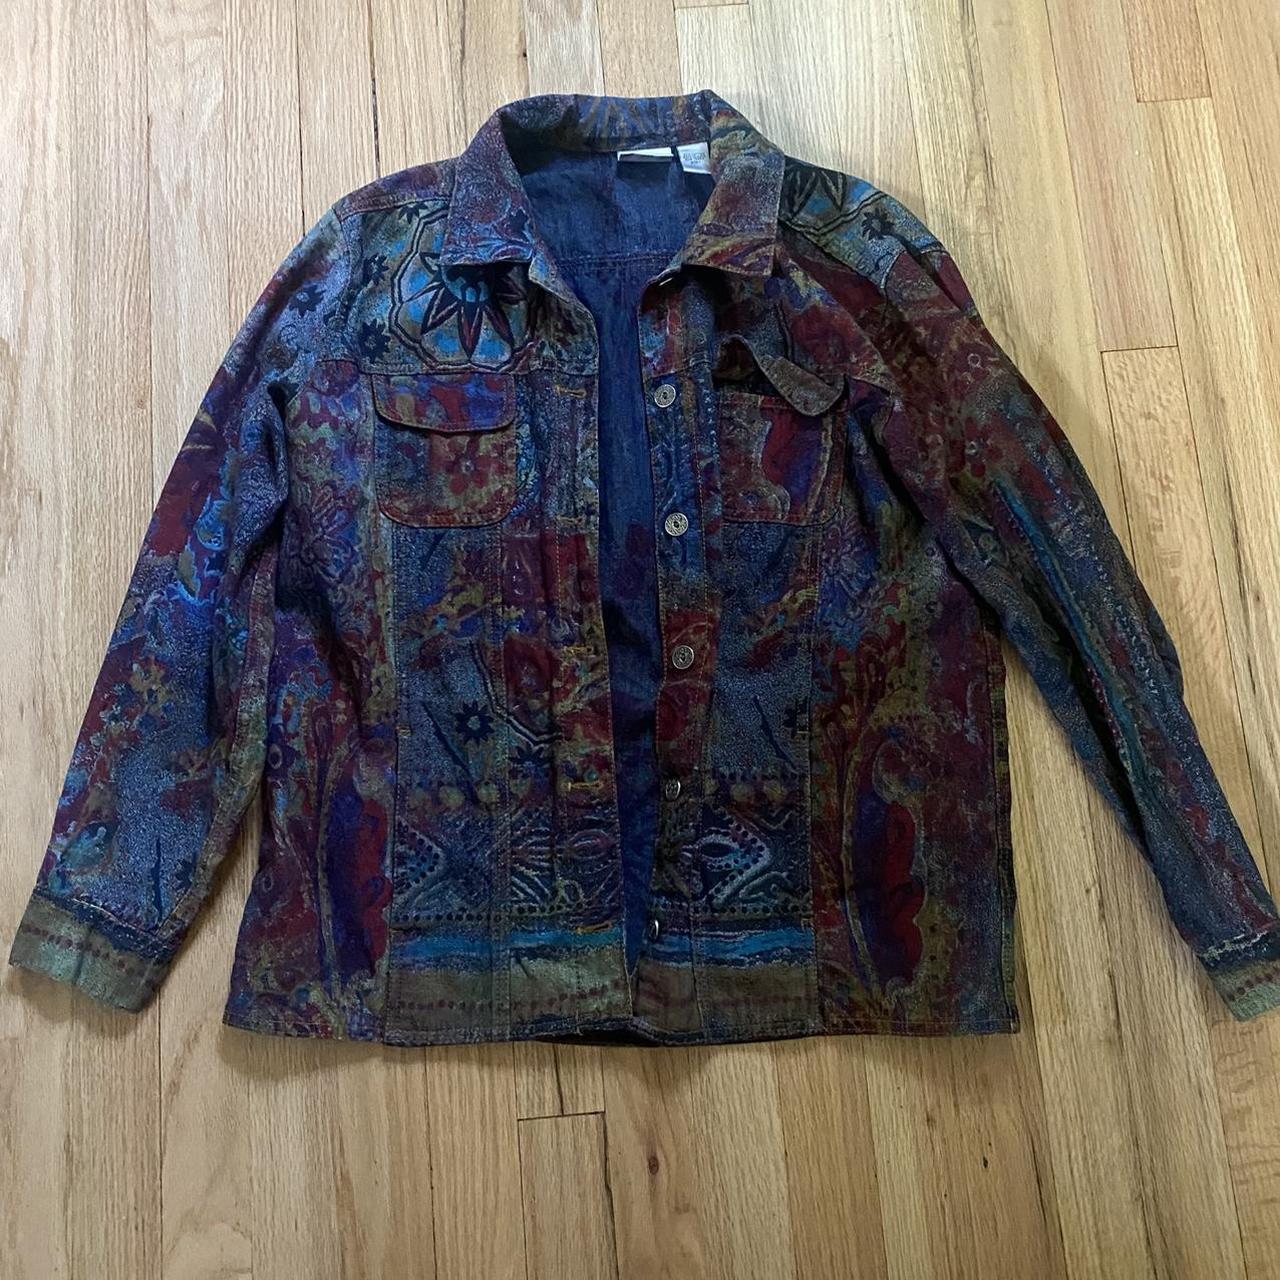 Multicolored, jean jacket. Hippie vibe, relaxed fit. - Depop